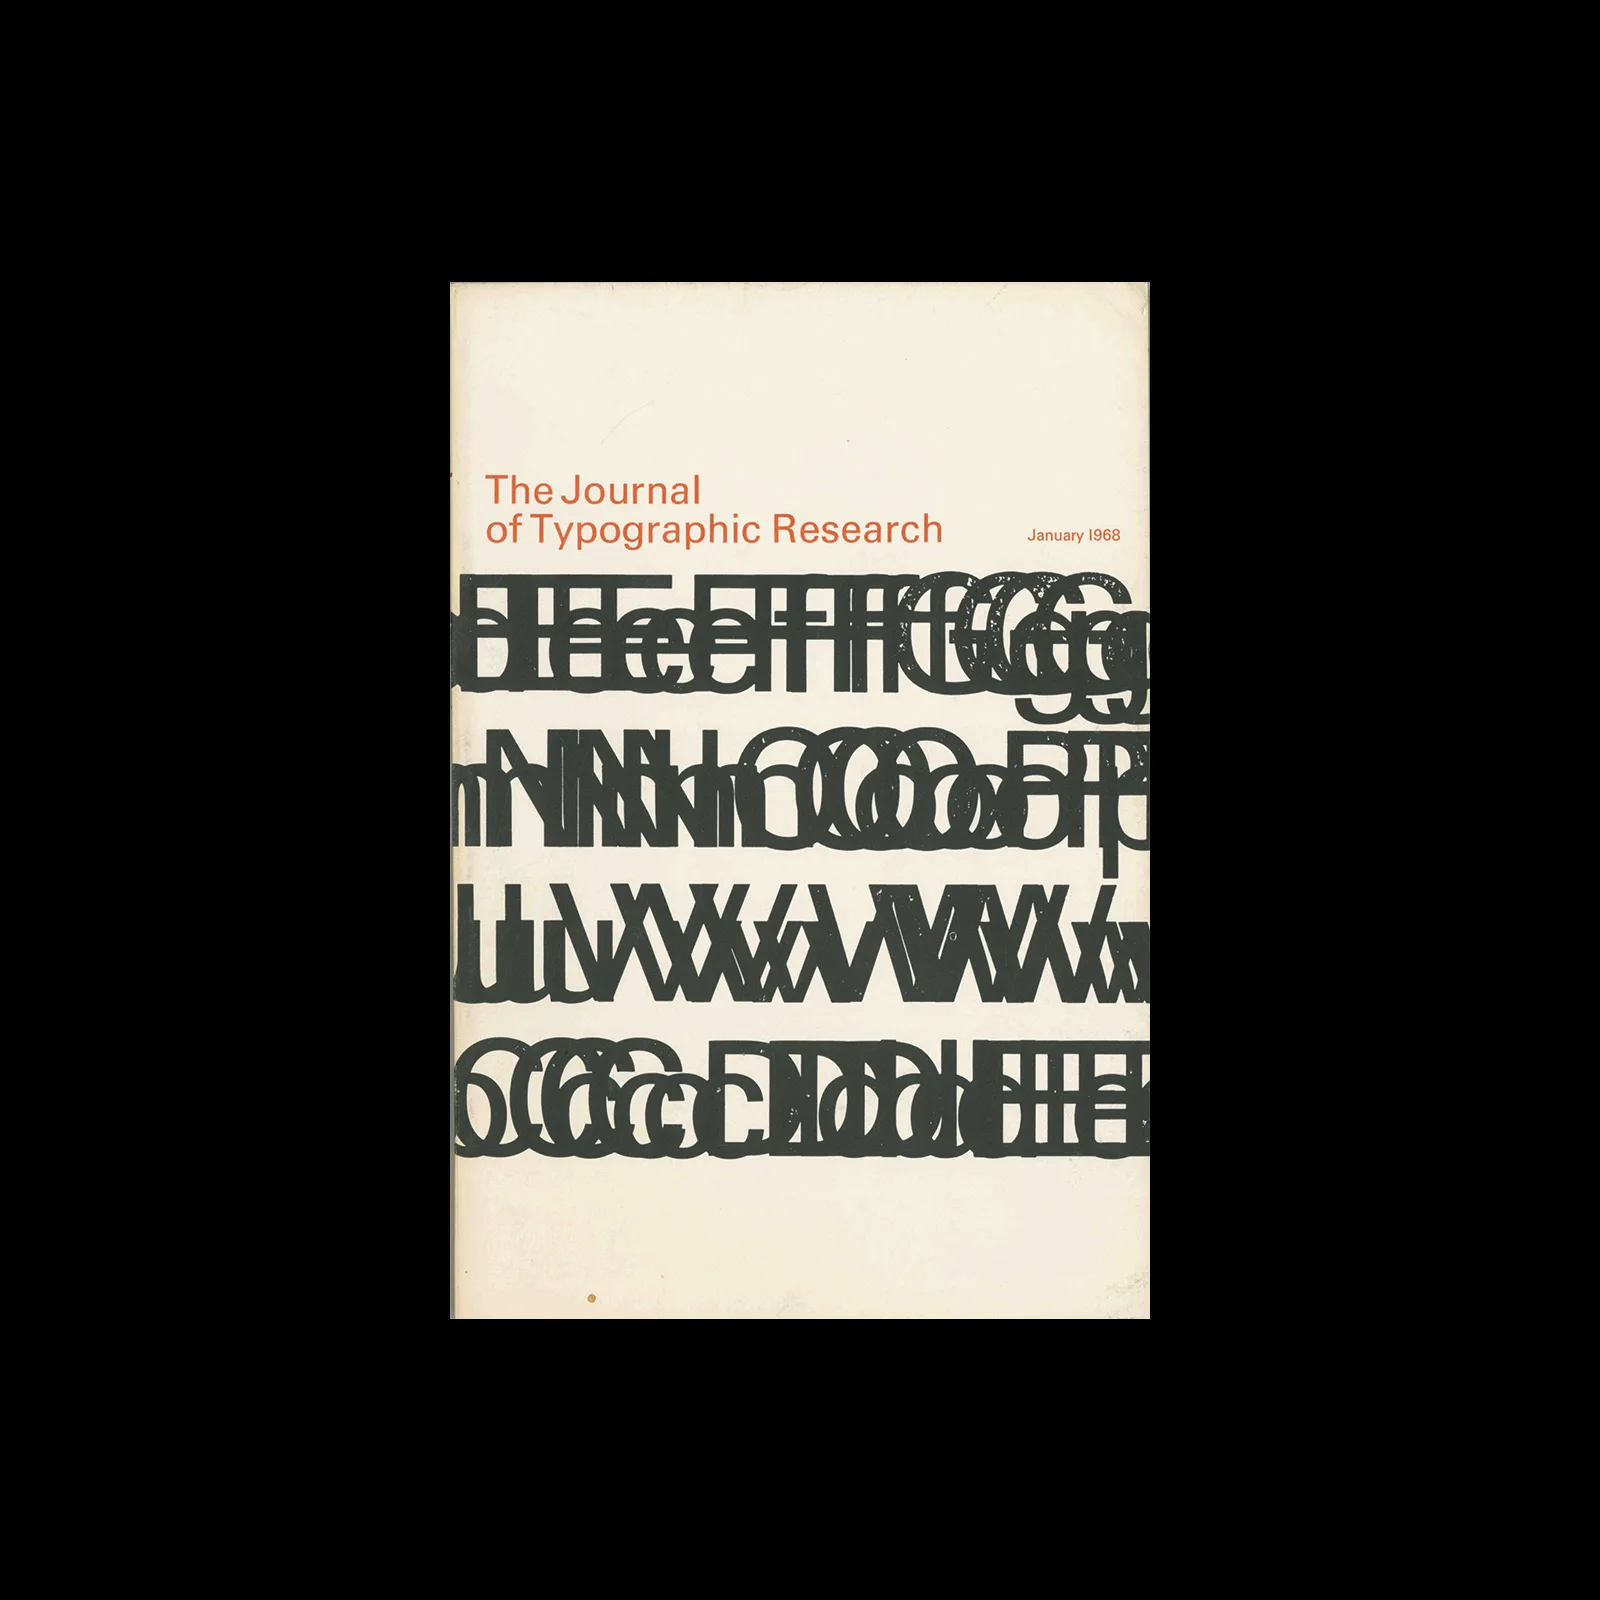 Visible Language (The Journal of Typographic Research, Vol 02, 01, January 1968